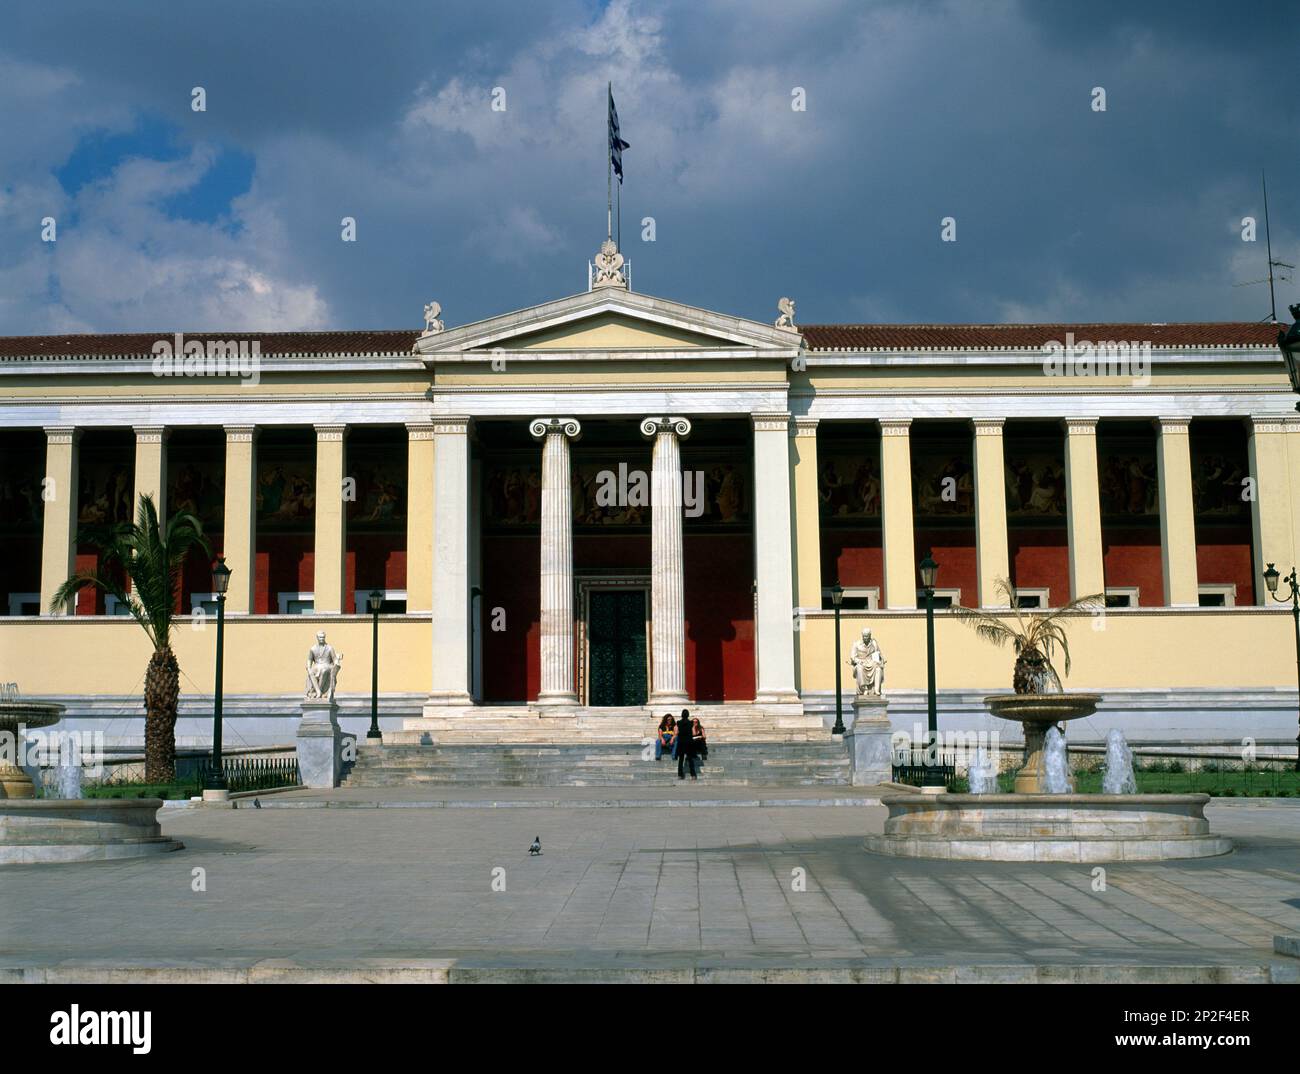 Athens Greece National and Kapodistrian University of Athens 19th Century Building now serves as a Ceremony Hall and Rectory Columns & Fountains Stock Photo